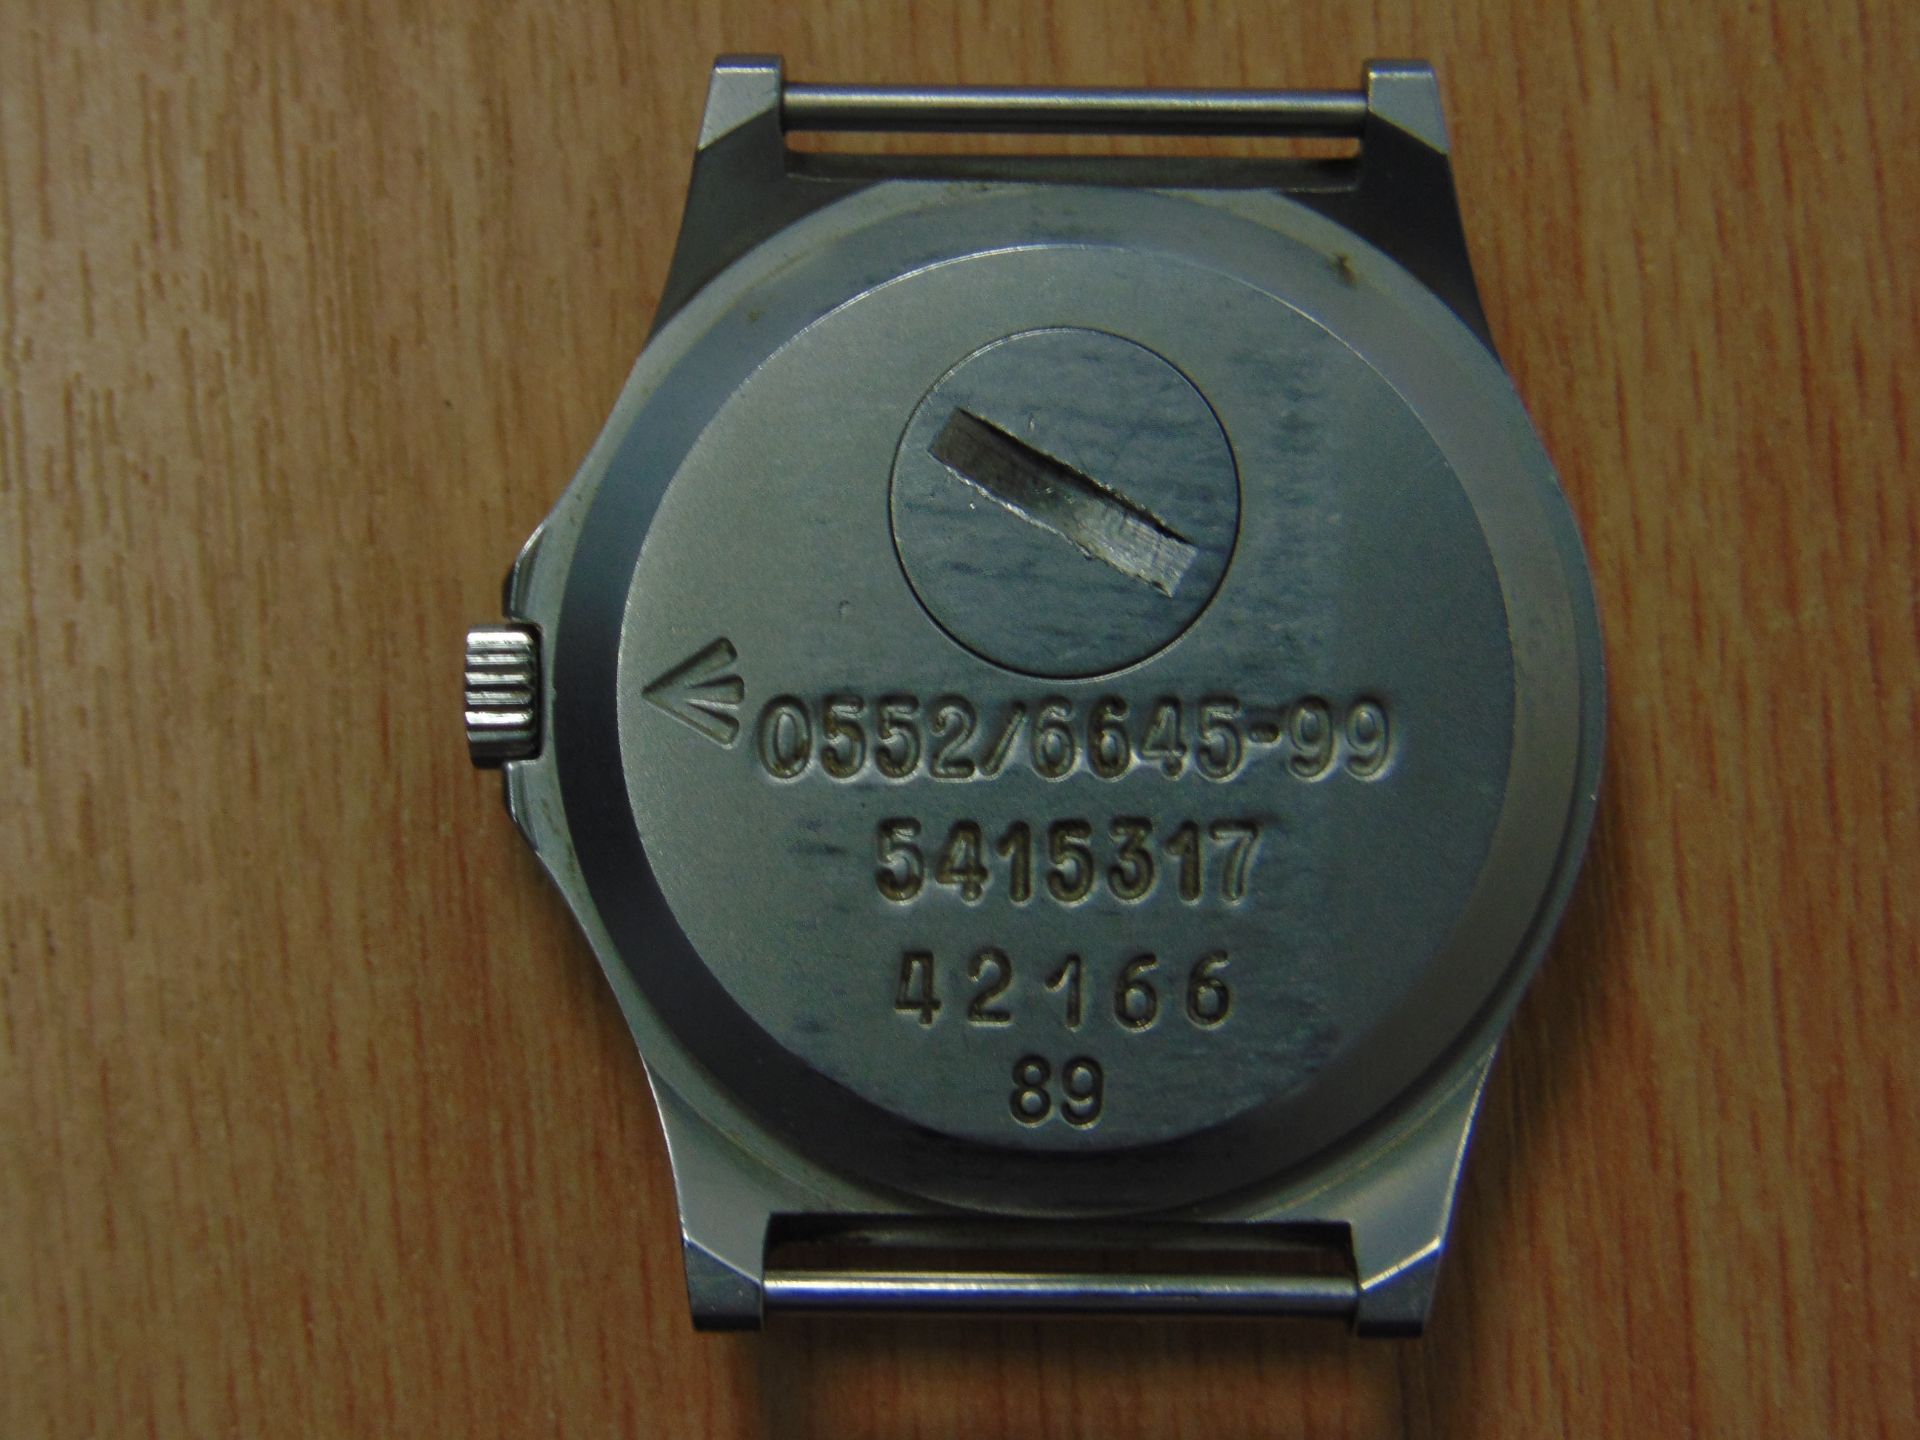 CWC "RARE" 0552 ROYAL MARINES/ ROYAL NAVY ISSUE SERVICE WATCH DATED 19889 GULF WAR - Image 6 of 8